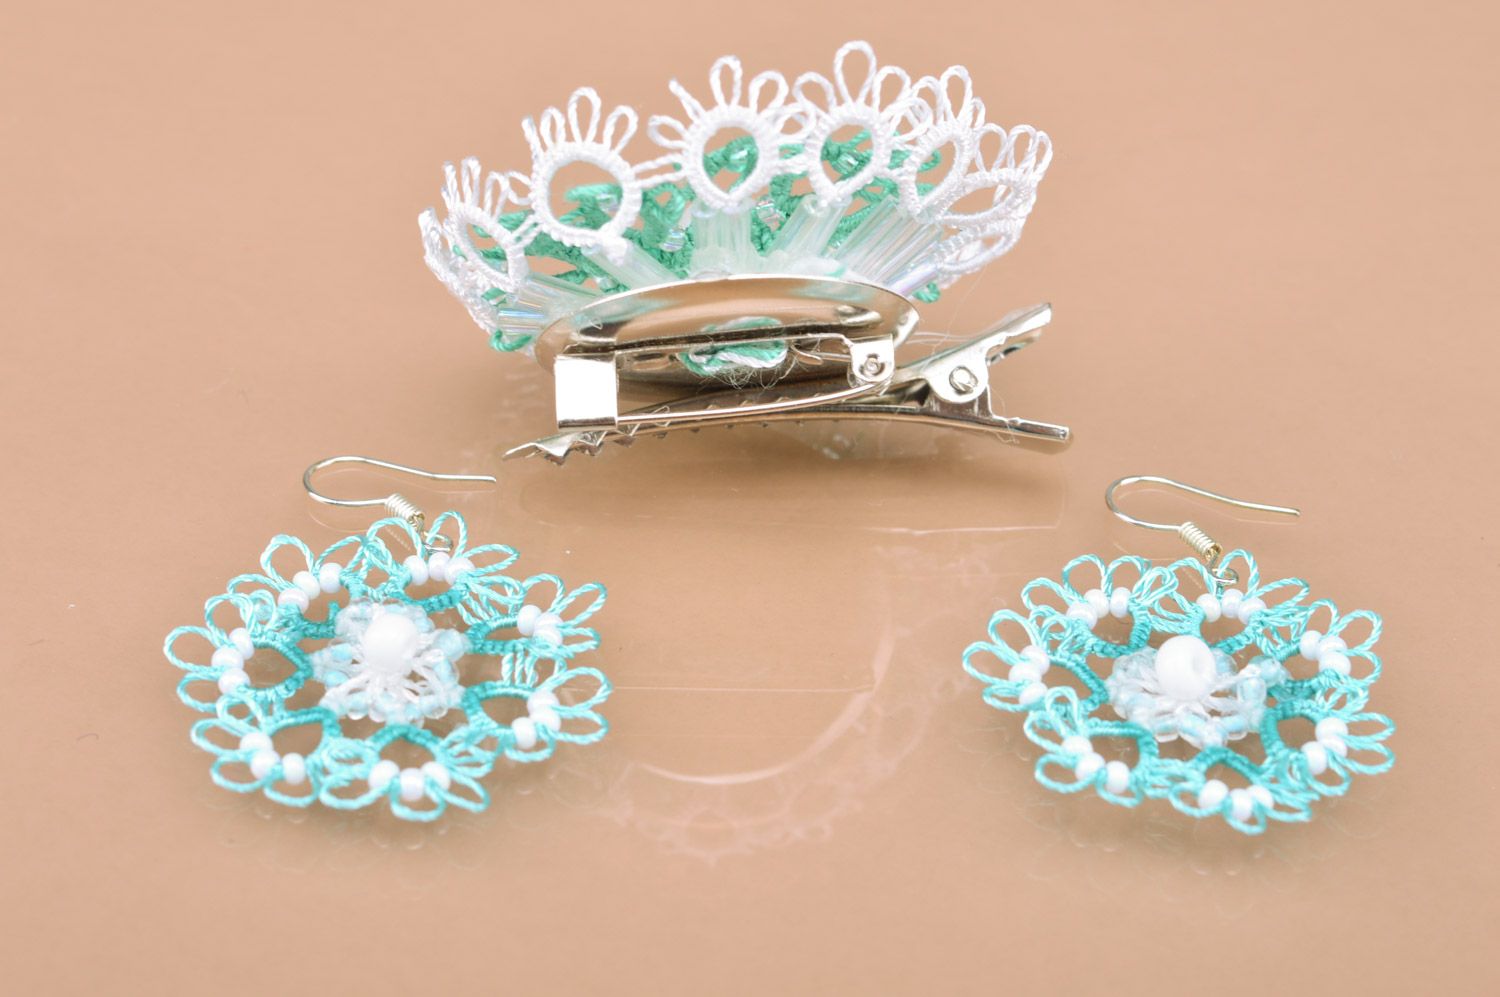 Handmade tatting woven jewelry set 2 items turquoise earrings and brooch hair clip photo 3